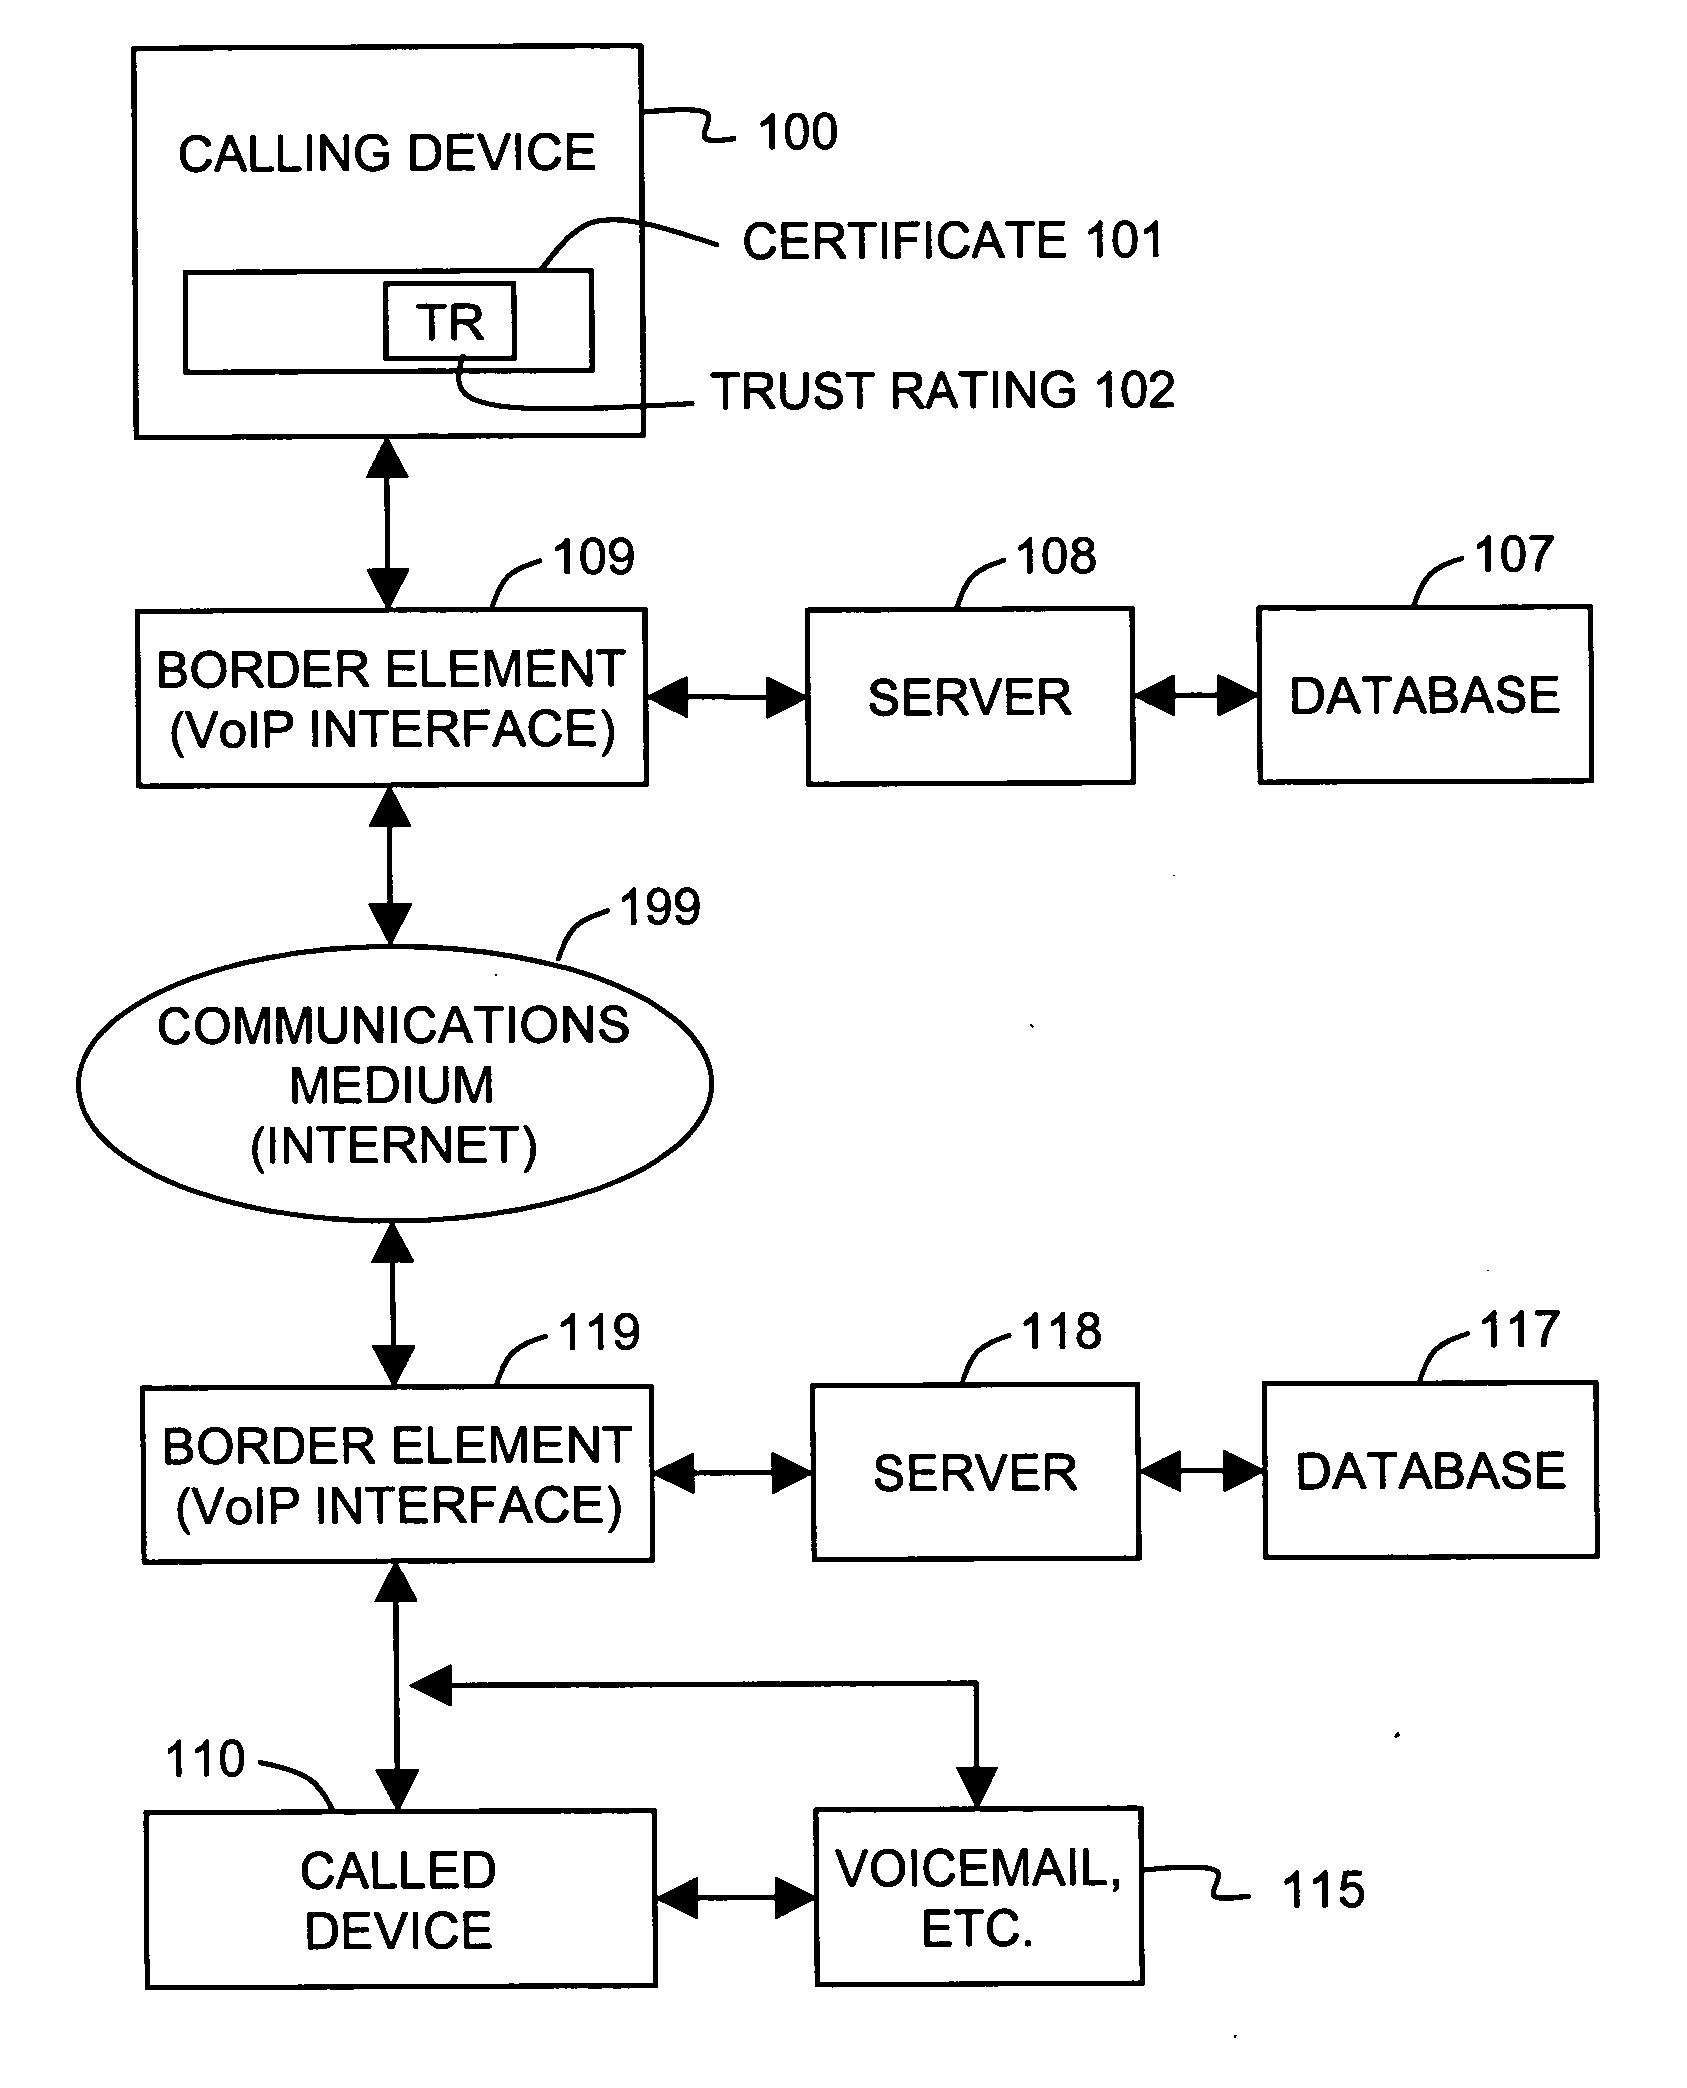 Arrangement for managing voice over IP (VoIP) telephone calls, especially unsolicited or unwanted calls